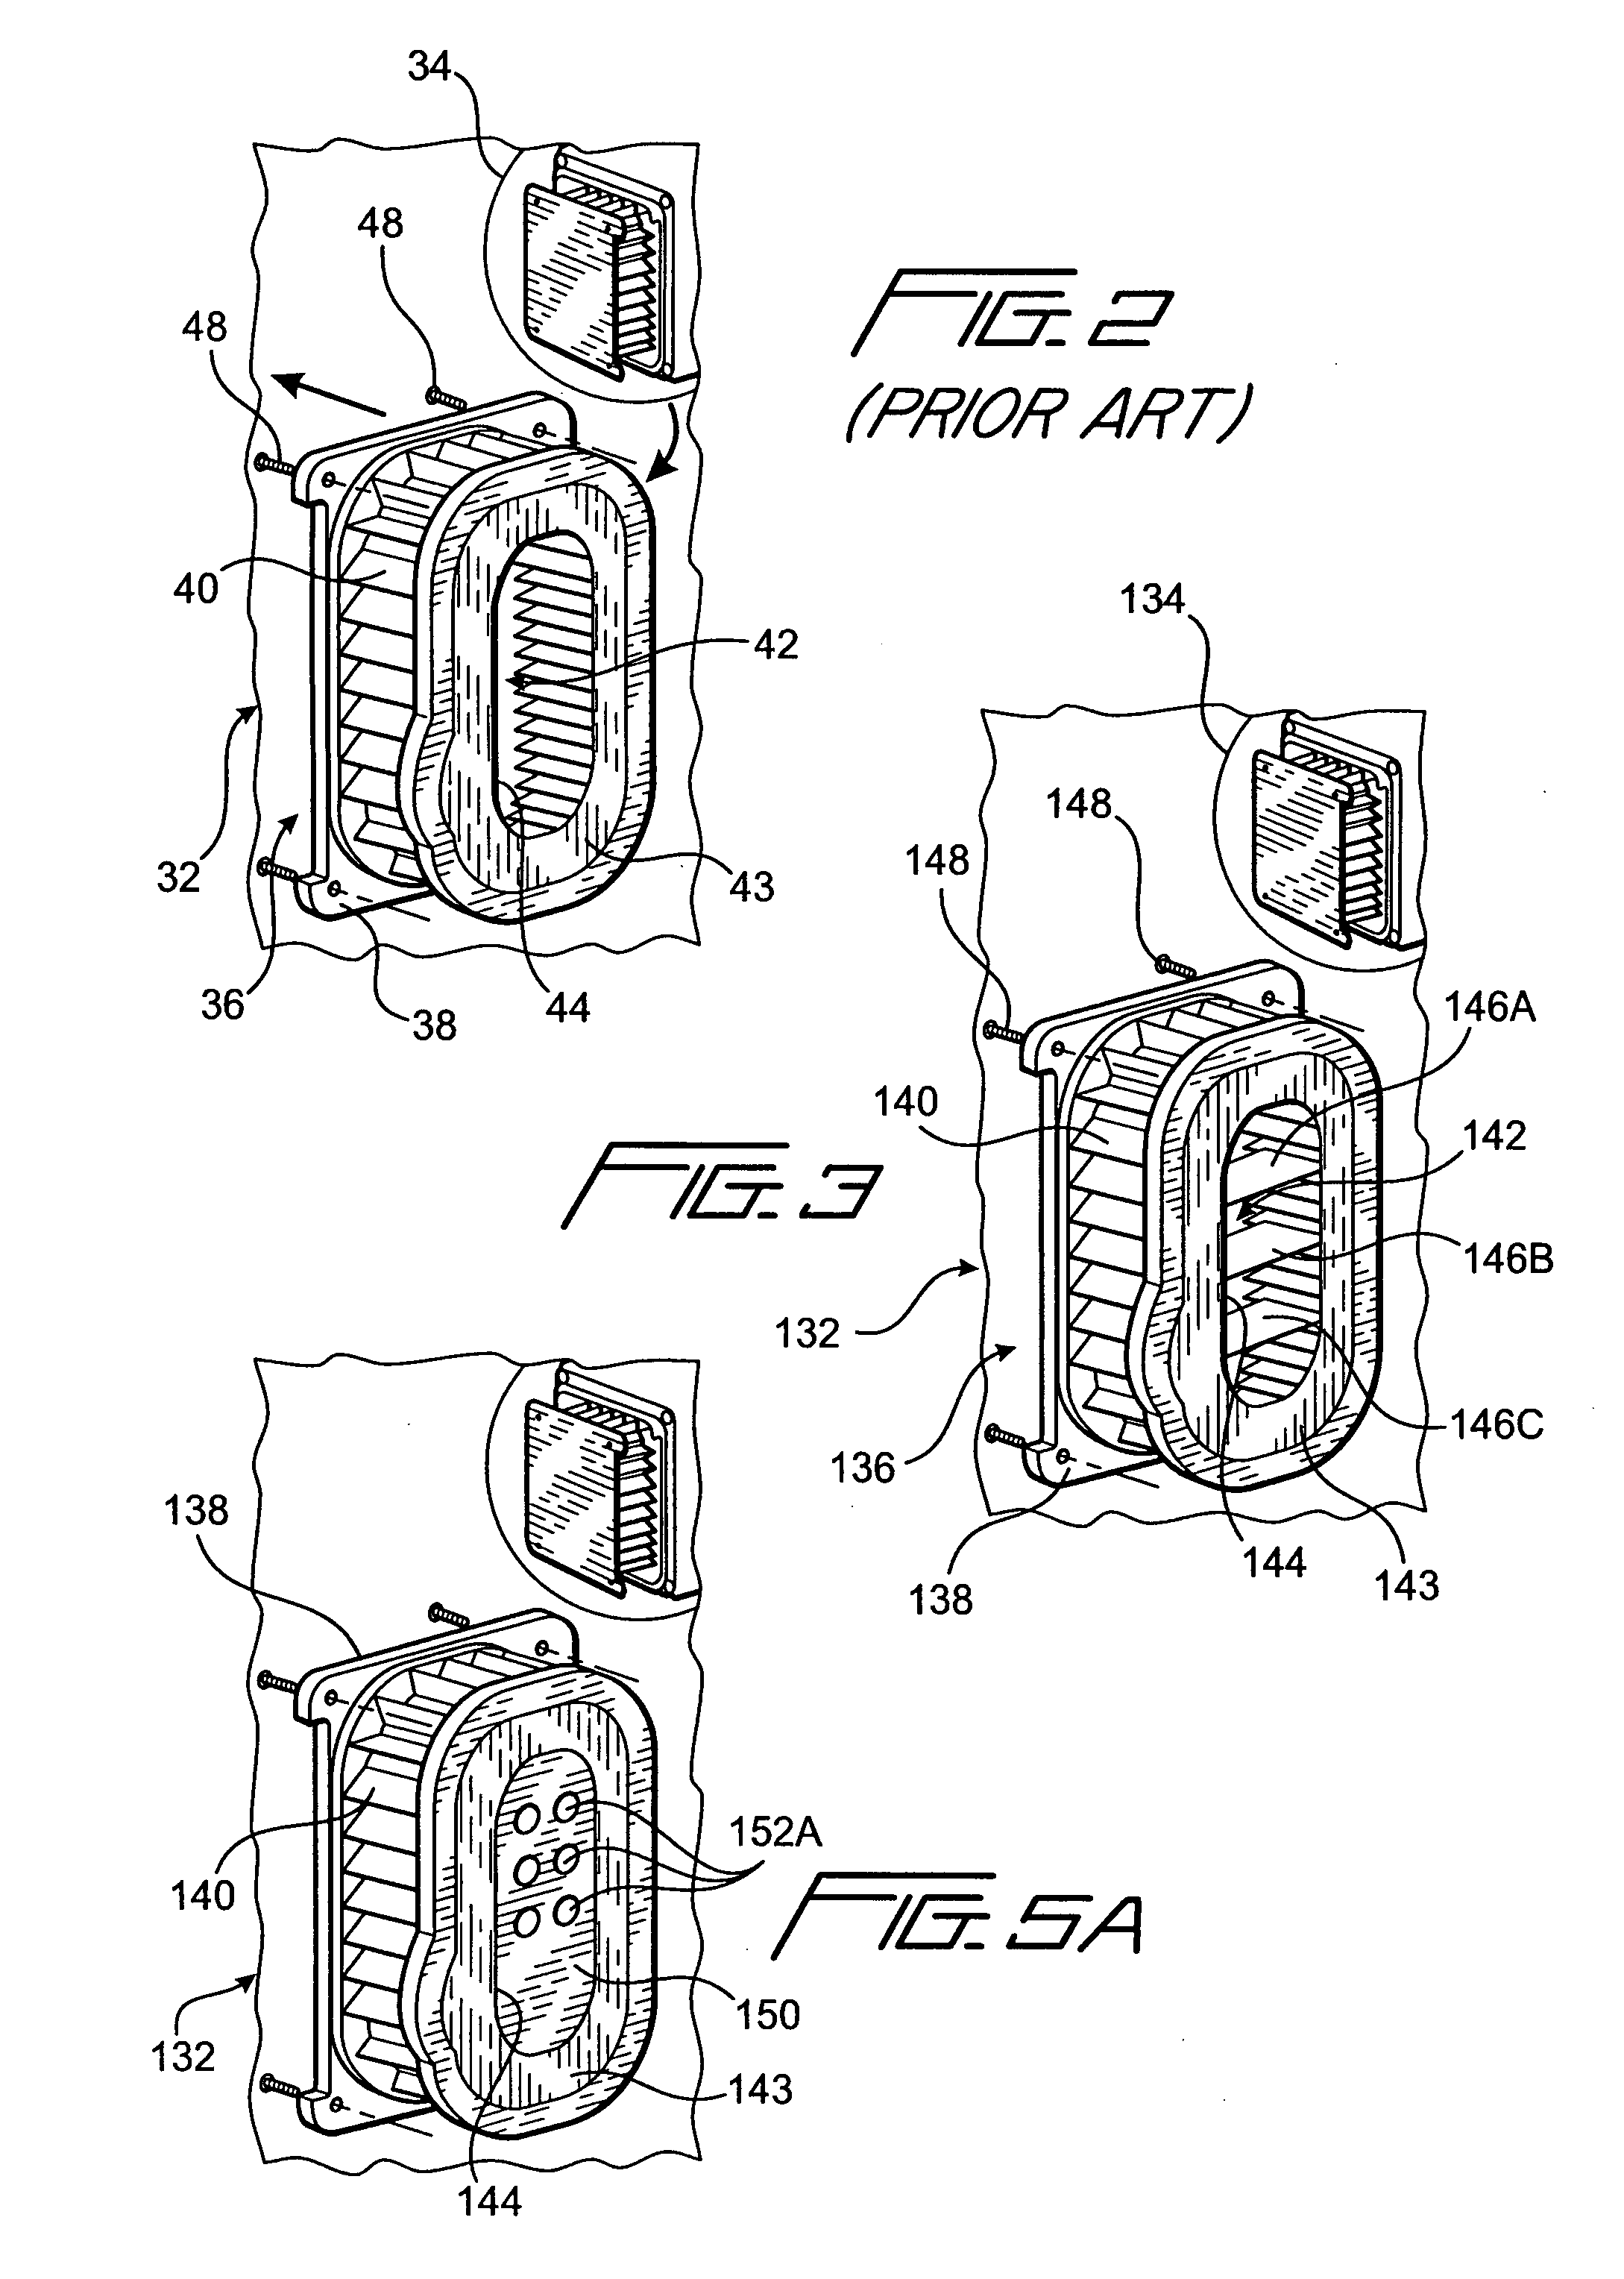 Air convection warmer with noise reduction filter